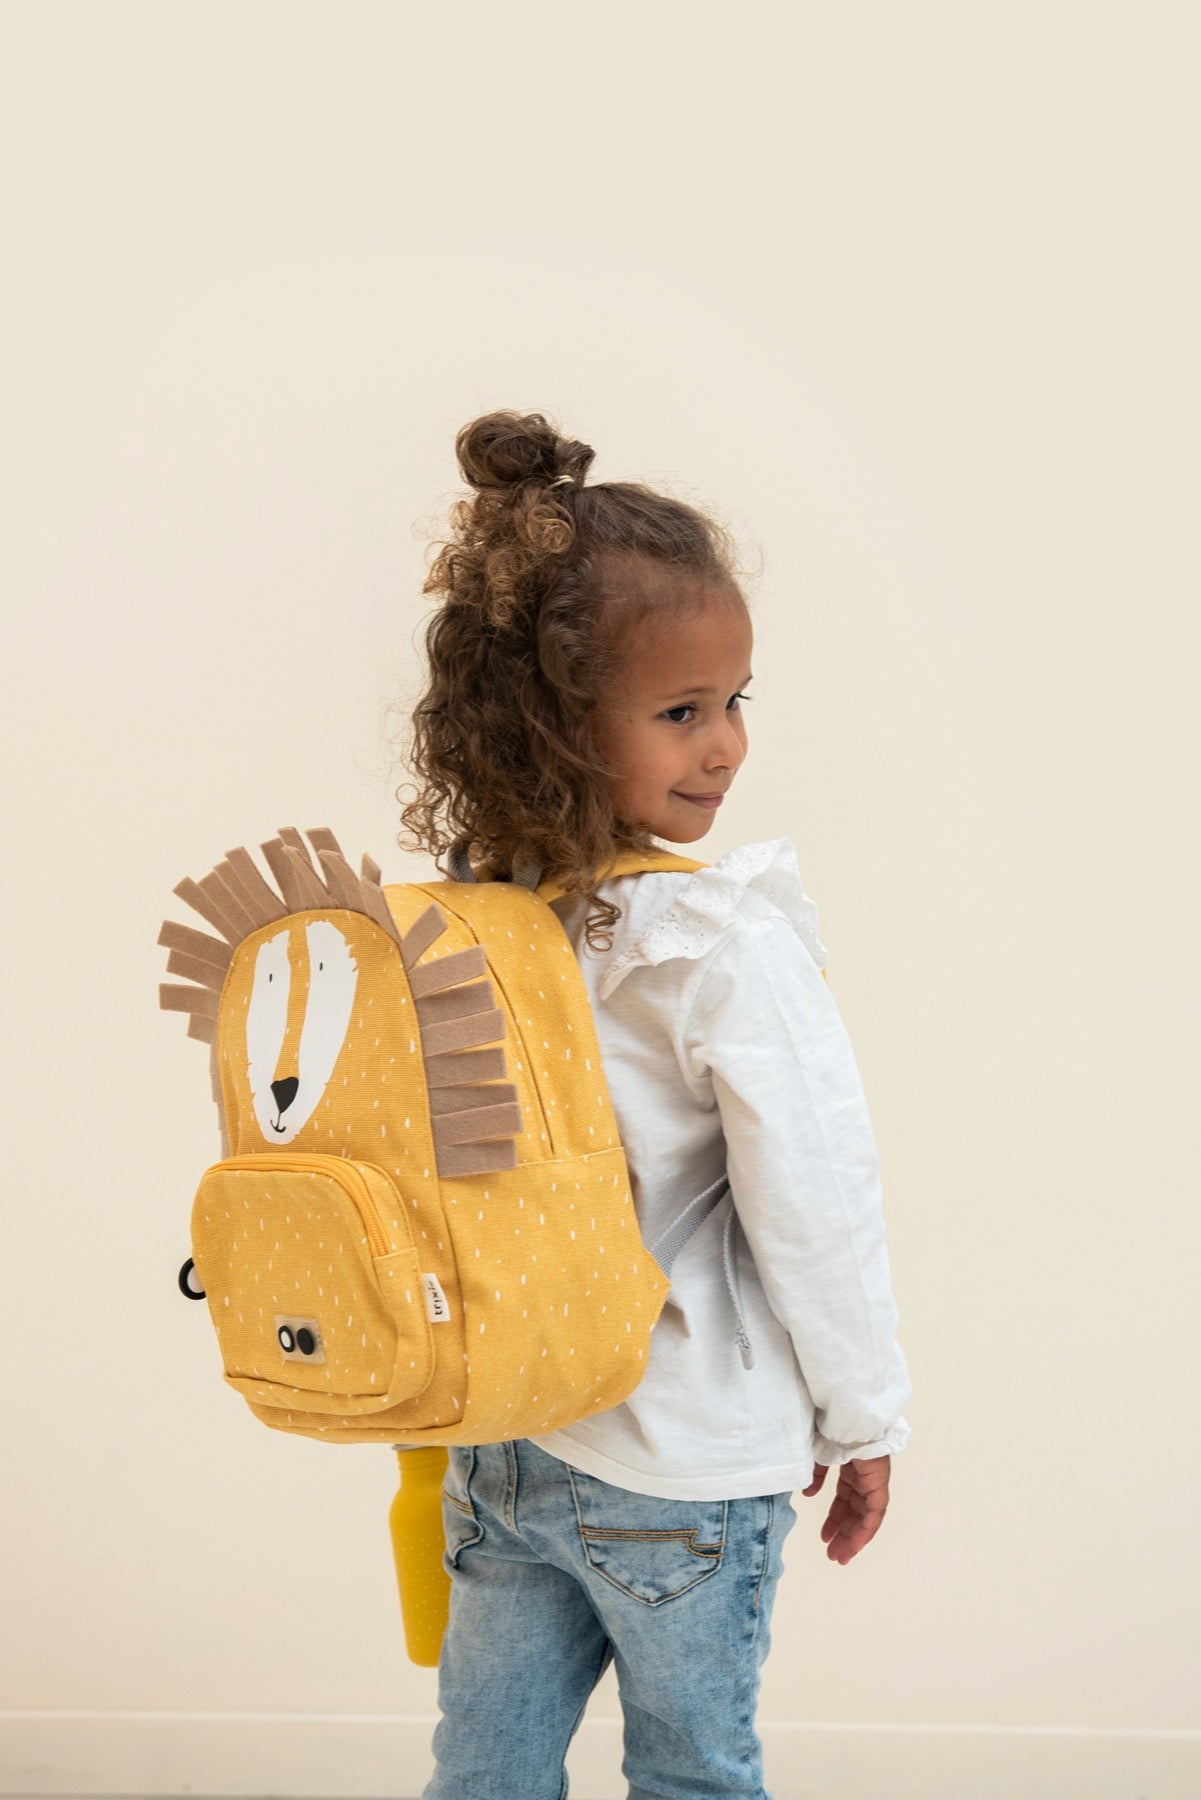 Trixie-Baby School Backpack - Mr Lion